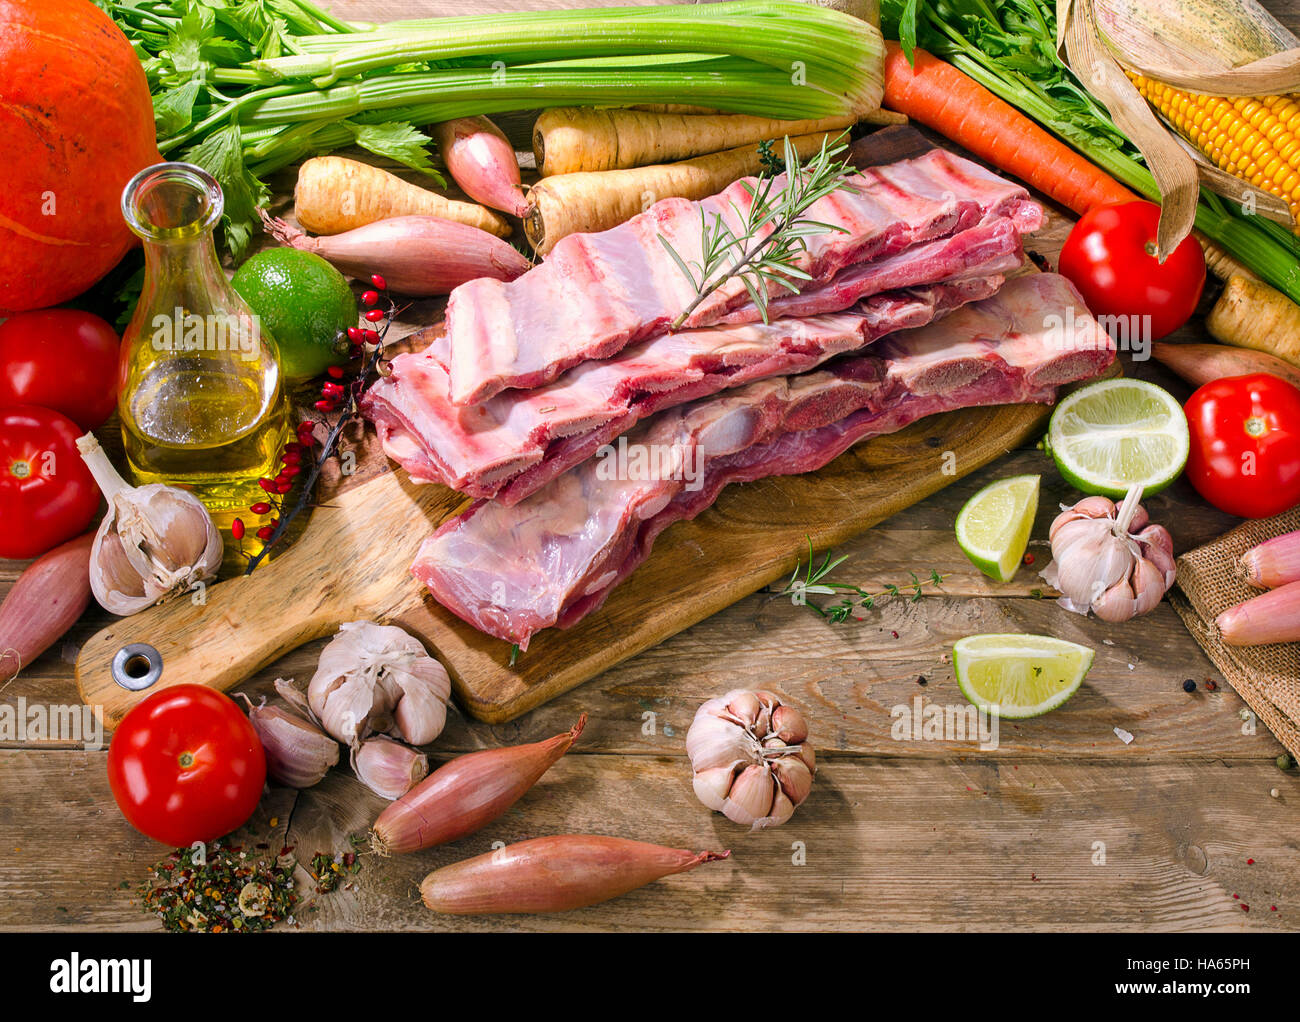 Raw beef ribs and vegetables on  wooden board. Stock Photo